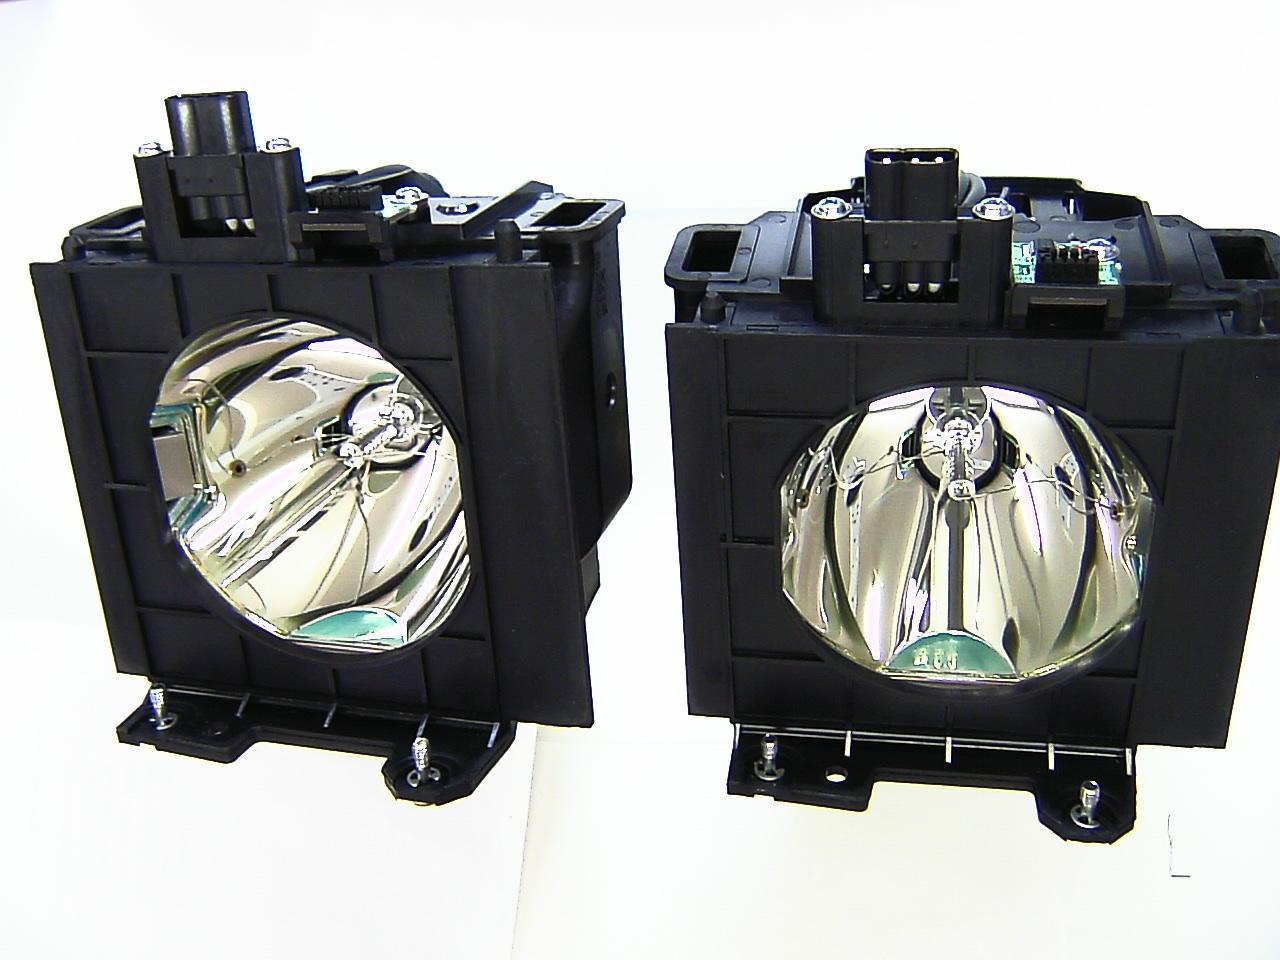 PTDW5100U Panasonic Twin-Pack Projector Lamp Replacement (contains two lamps). Projector Lamp Assembly with High Quality OEM Co